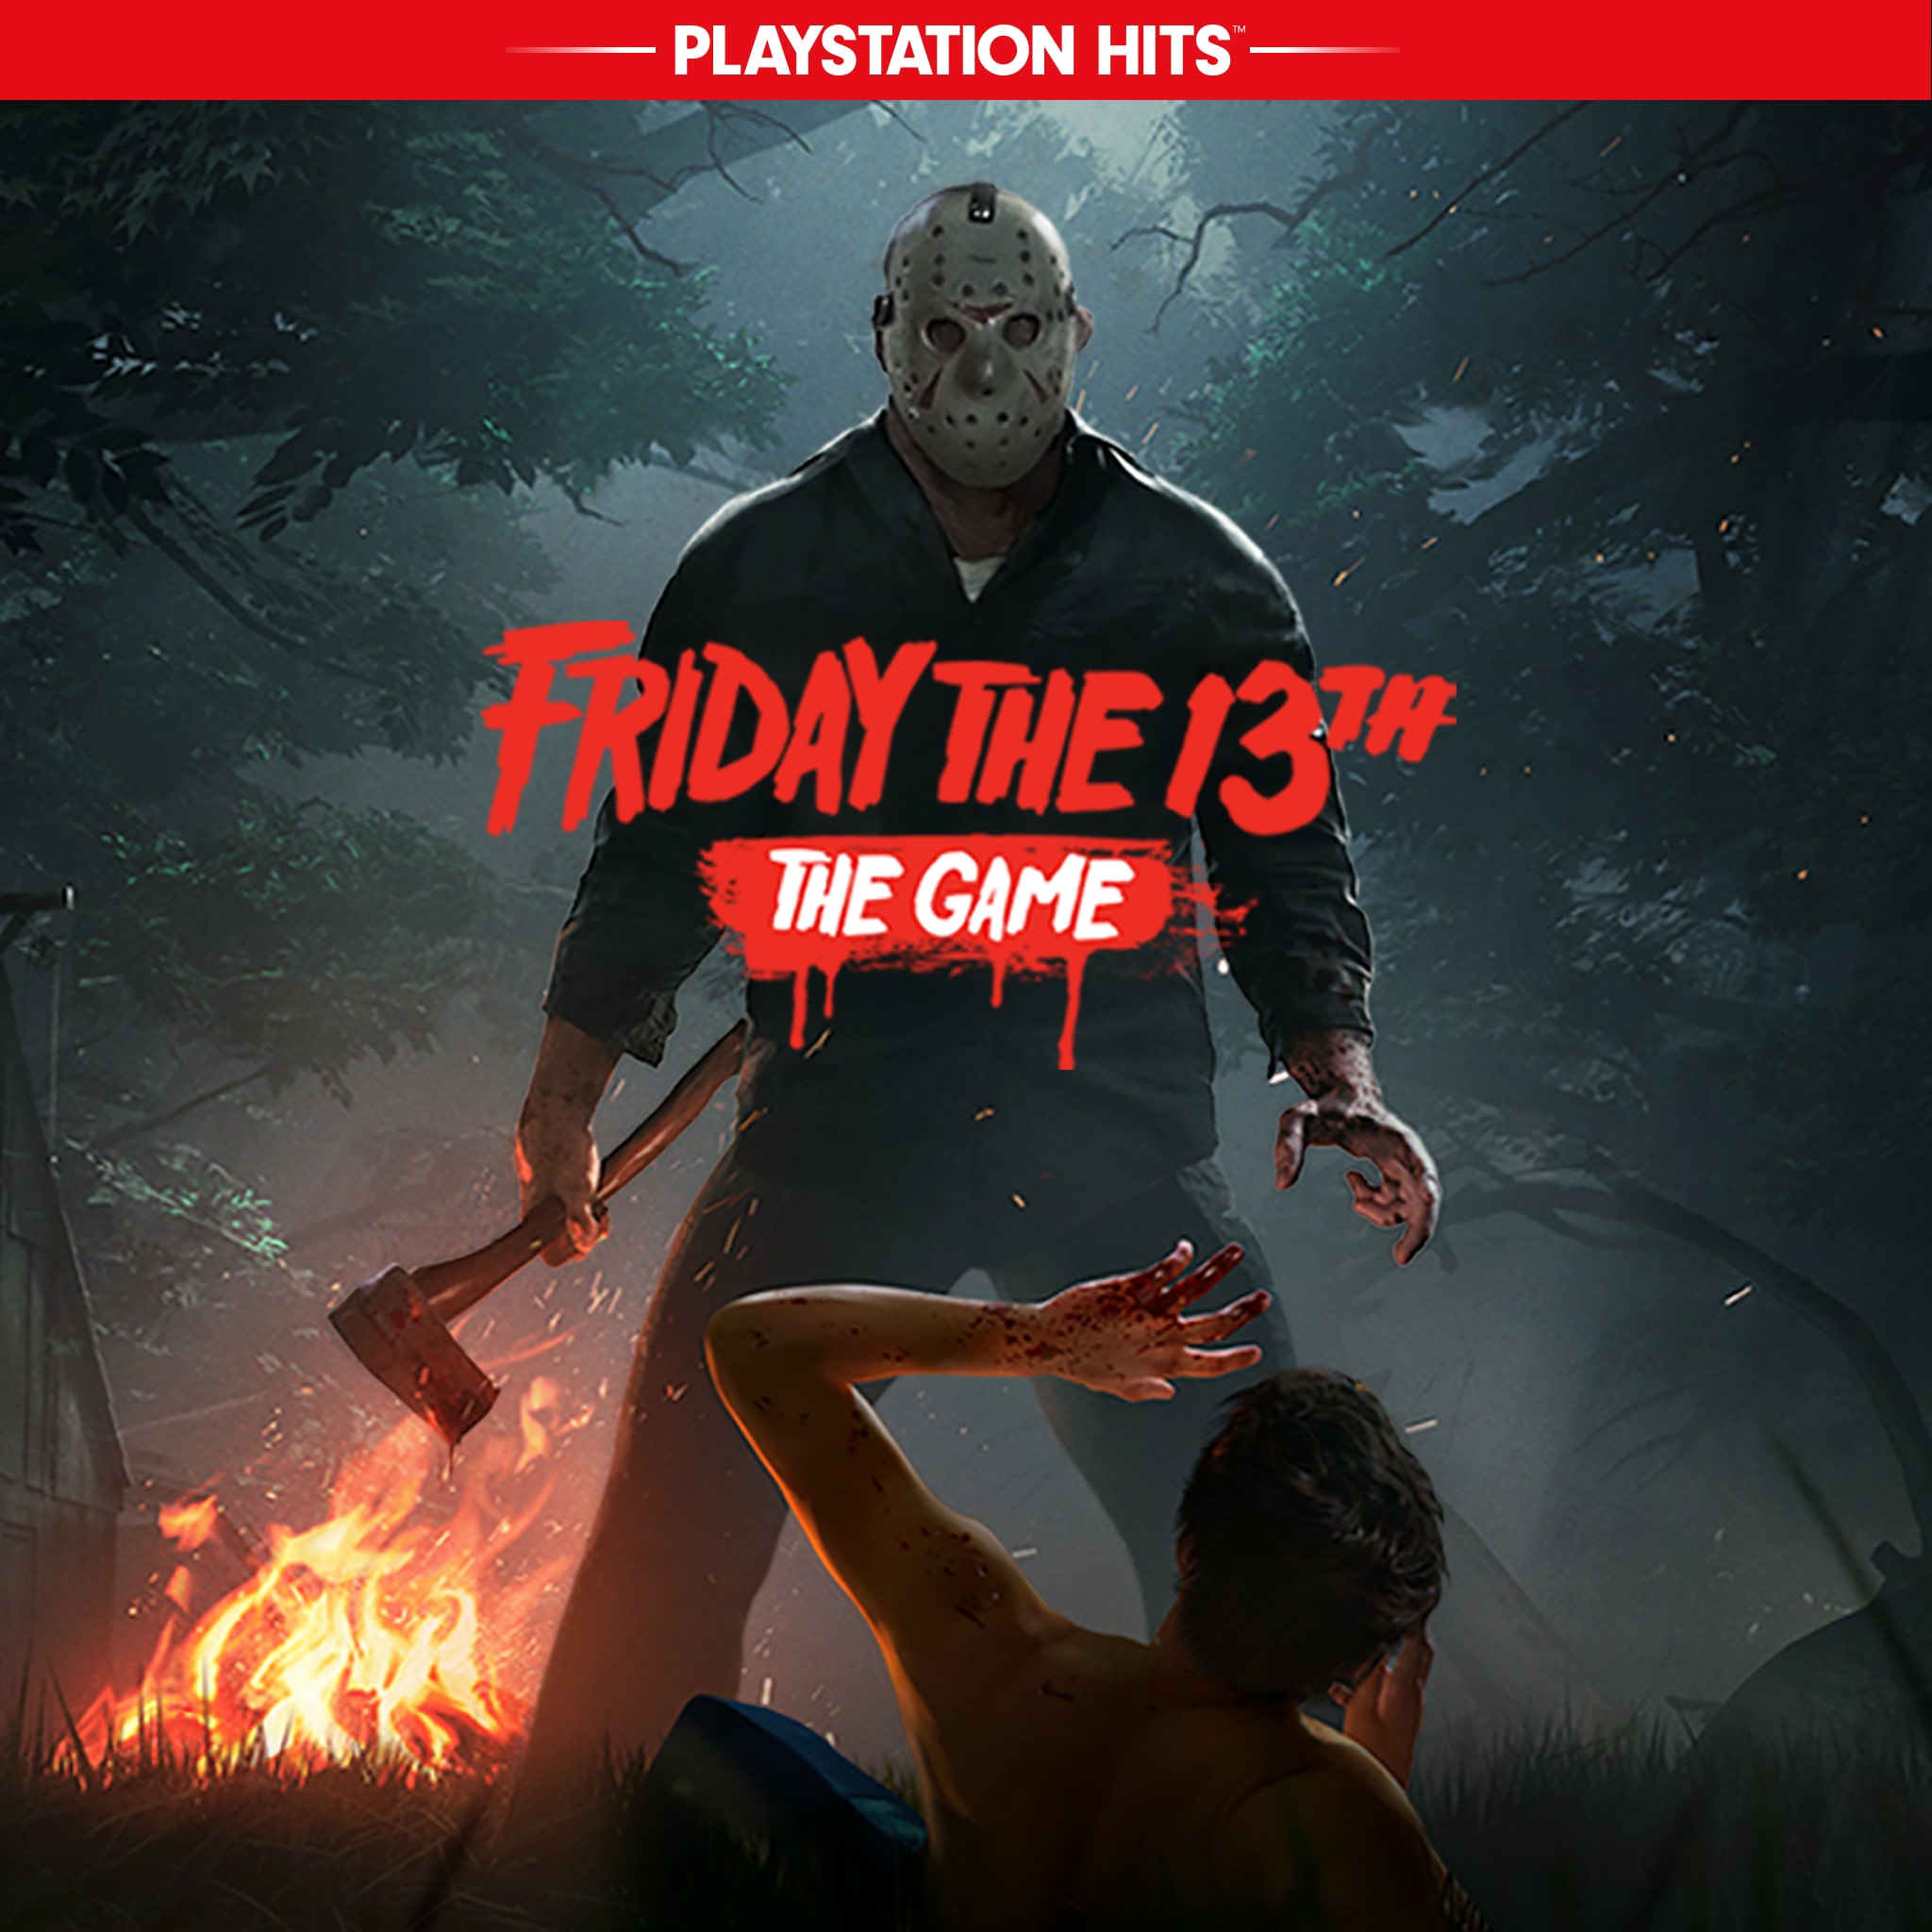  Friday The 13th: The Game Ultimate Slasher Edition -  PlayStation 4 : Ui Entertainment: Video Games